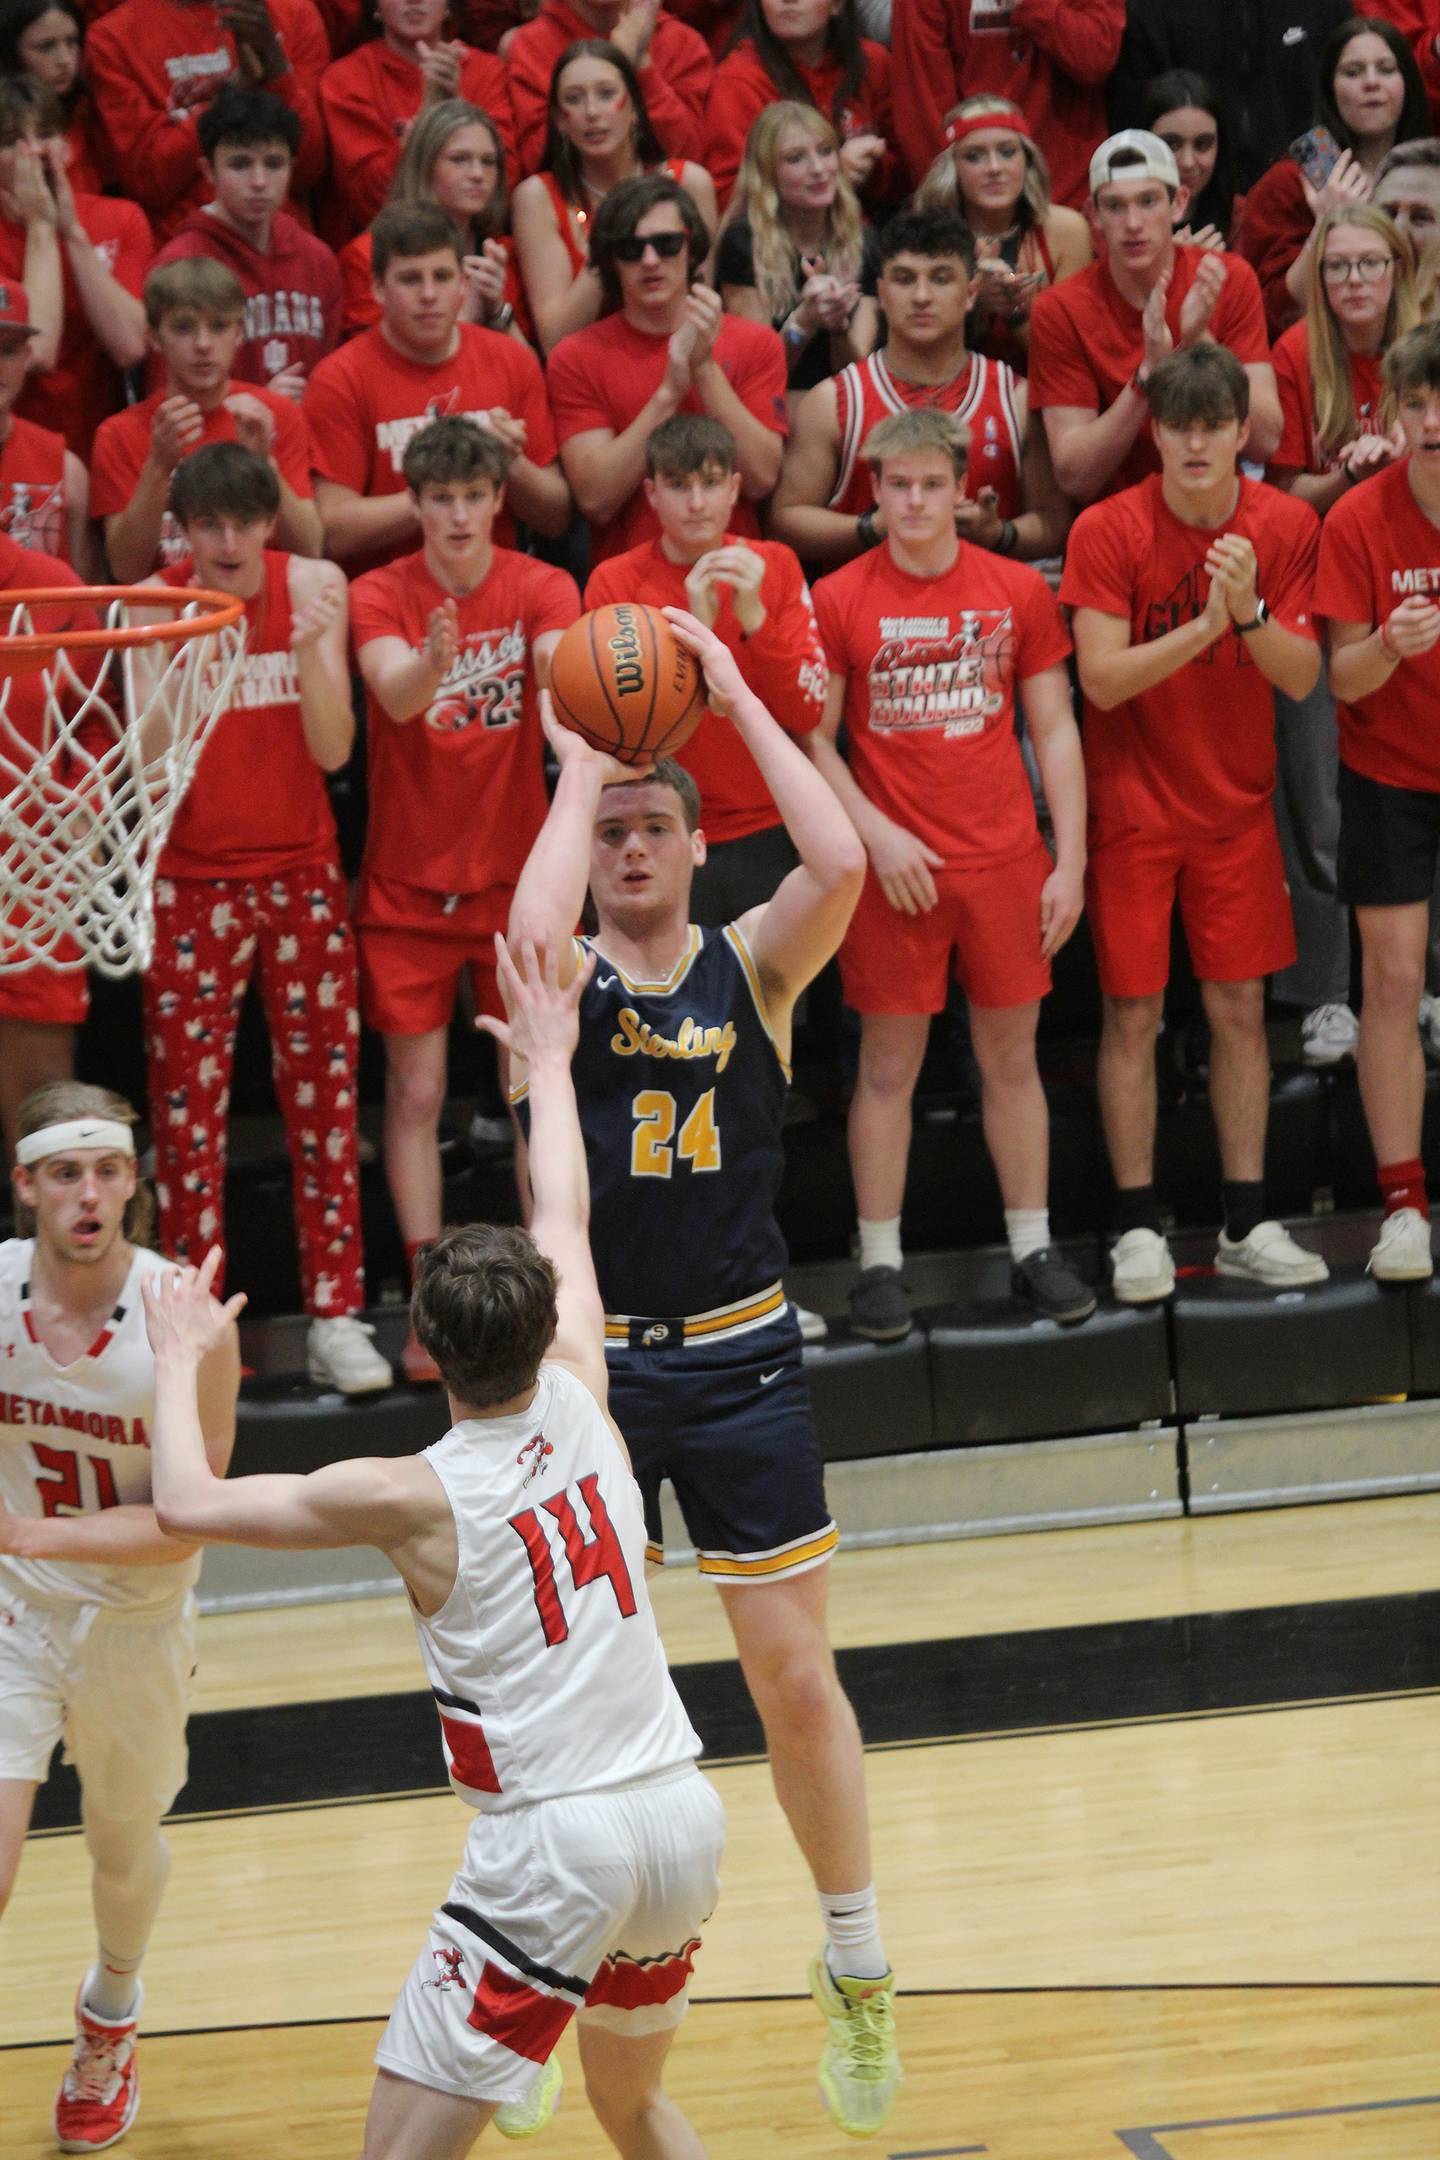 Sterling's Lucas Austin (24) shoots over Metamora's Luke Hopp as the Metamora student section looks on during the first half of their Class 3A Galesburg Sectional semifinal on Wednesday, March 1, 2023.